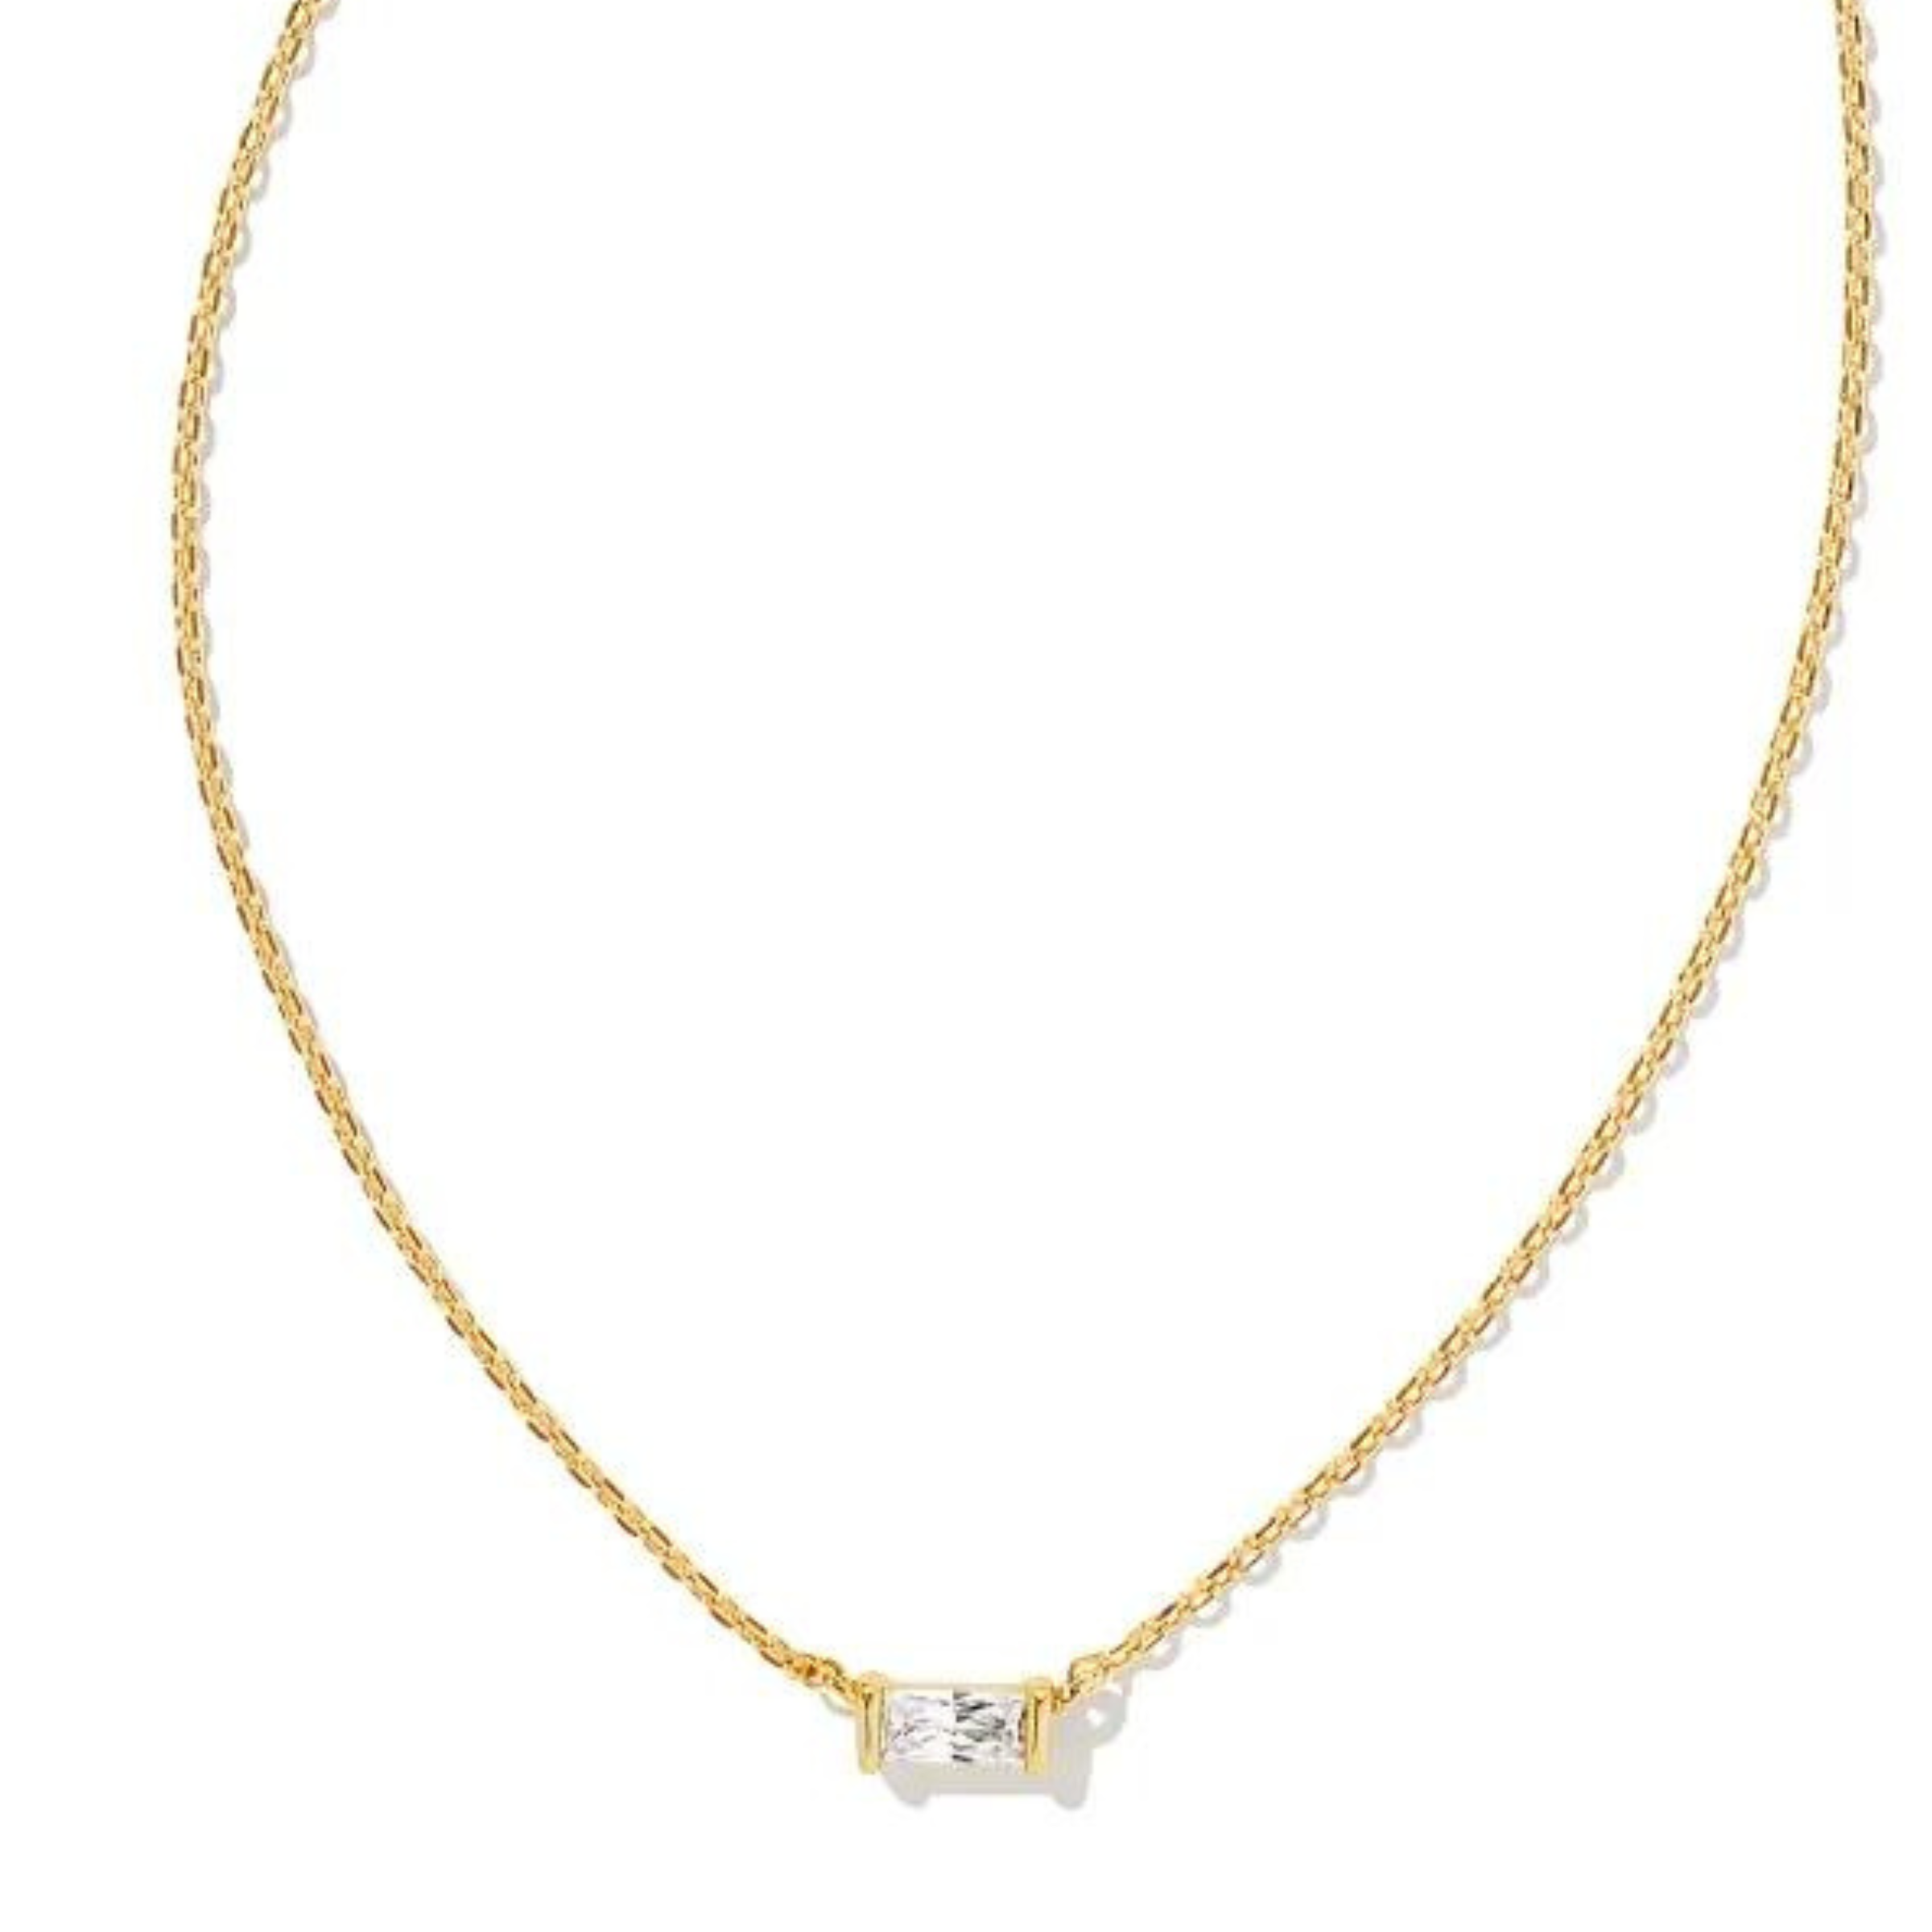 Gold chain necklace with a rectangle, clear crystal pendant. This necklace is pictured on a white background. 